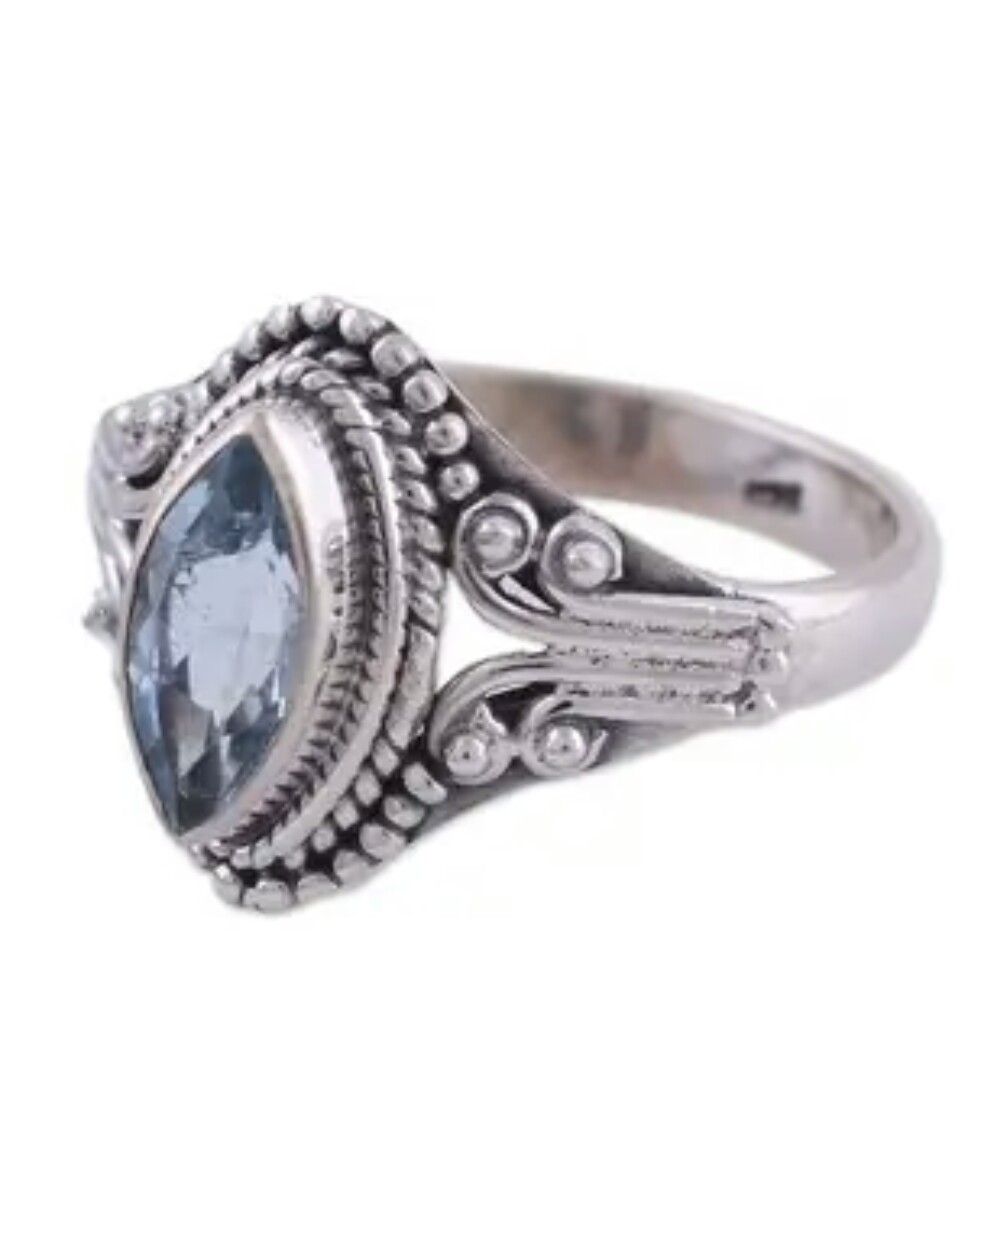 Blue Topaz and Sterling Silver Single Stone Ring from India